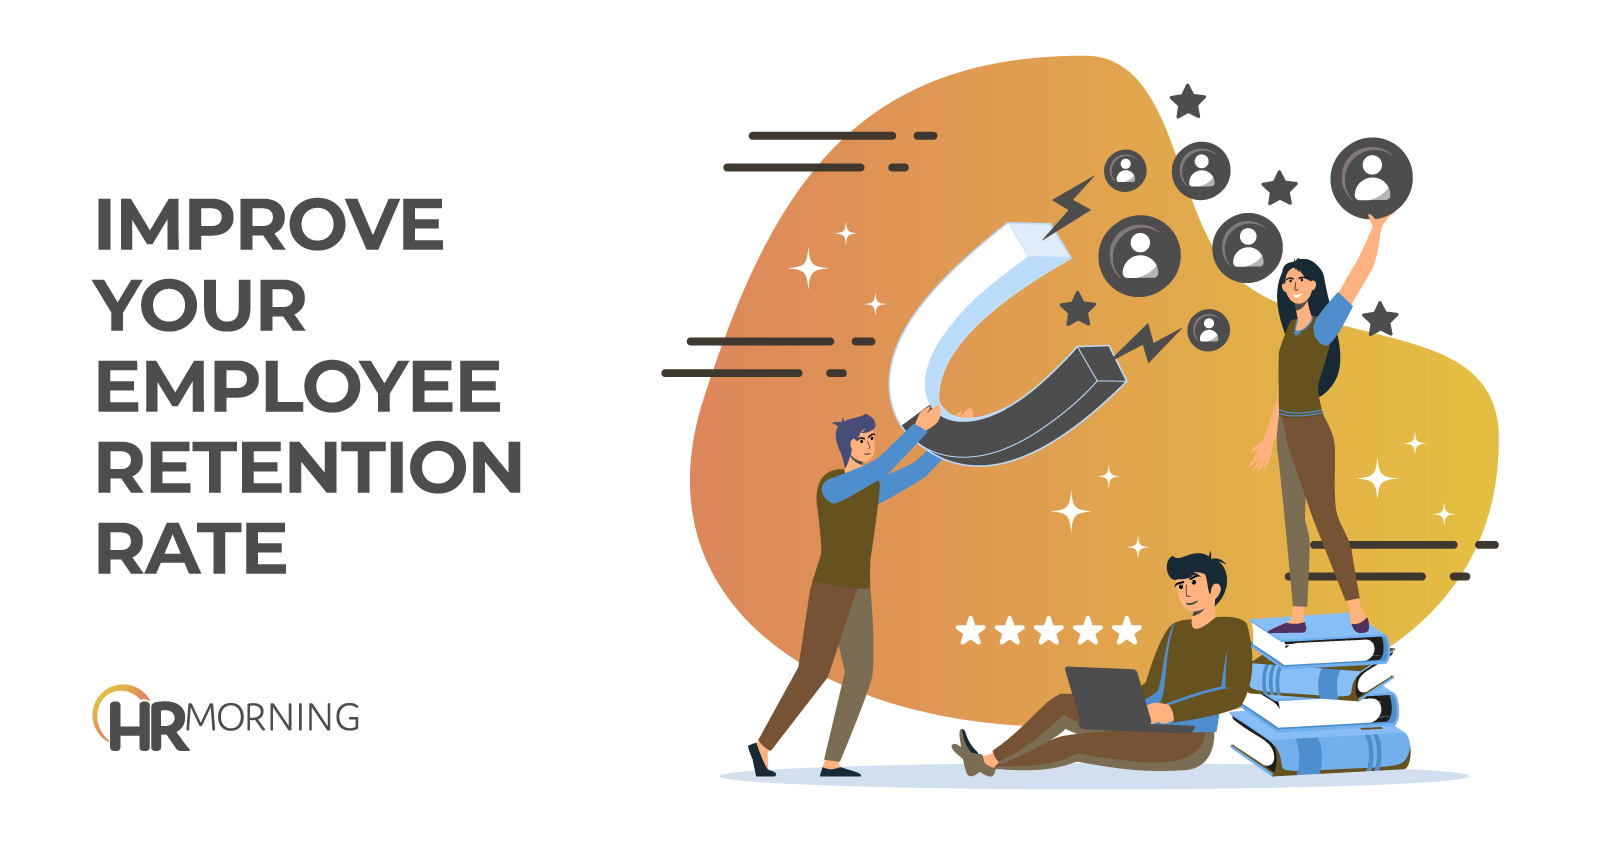 Improve your employee retention rate